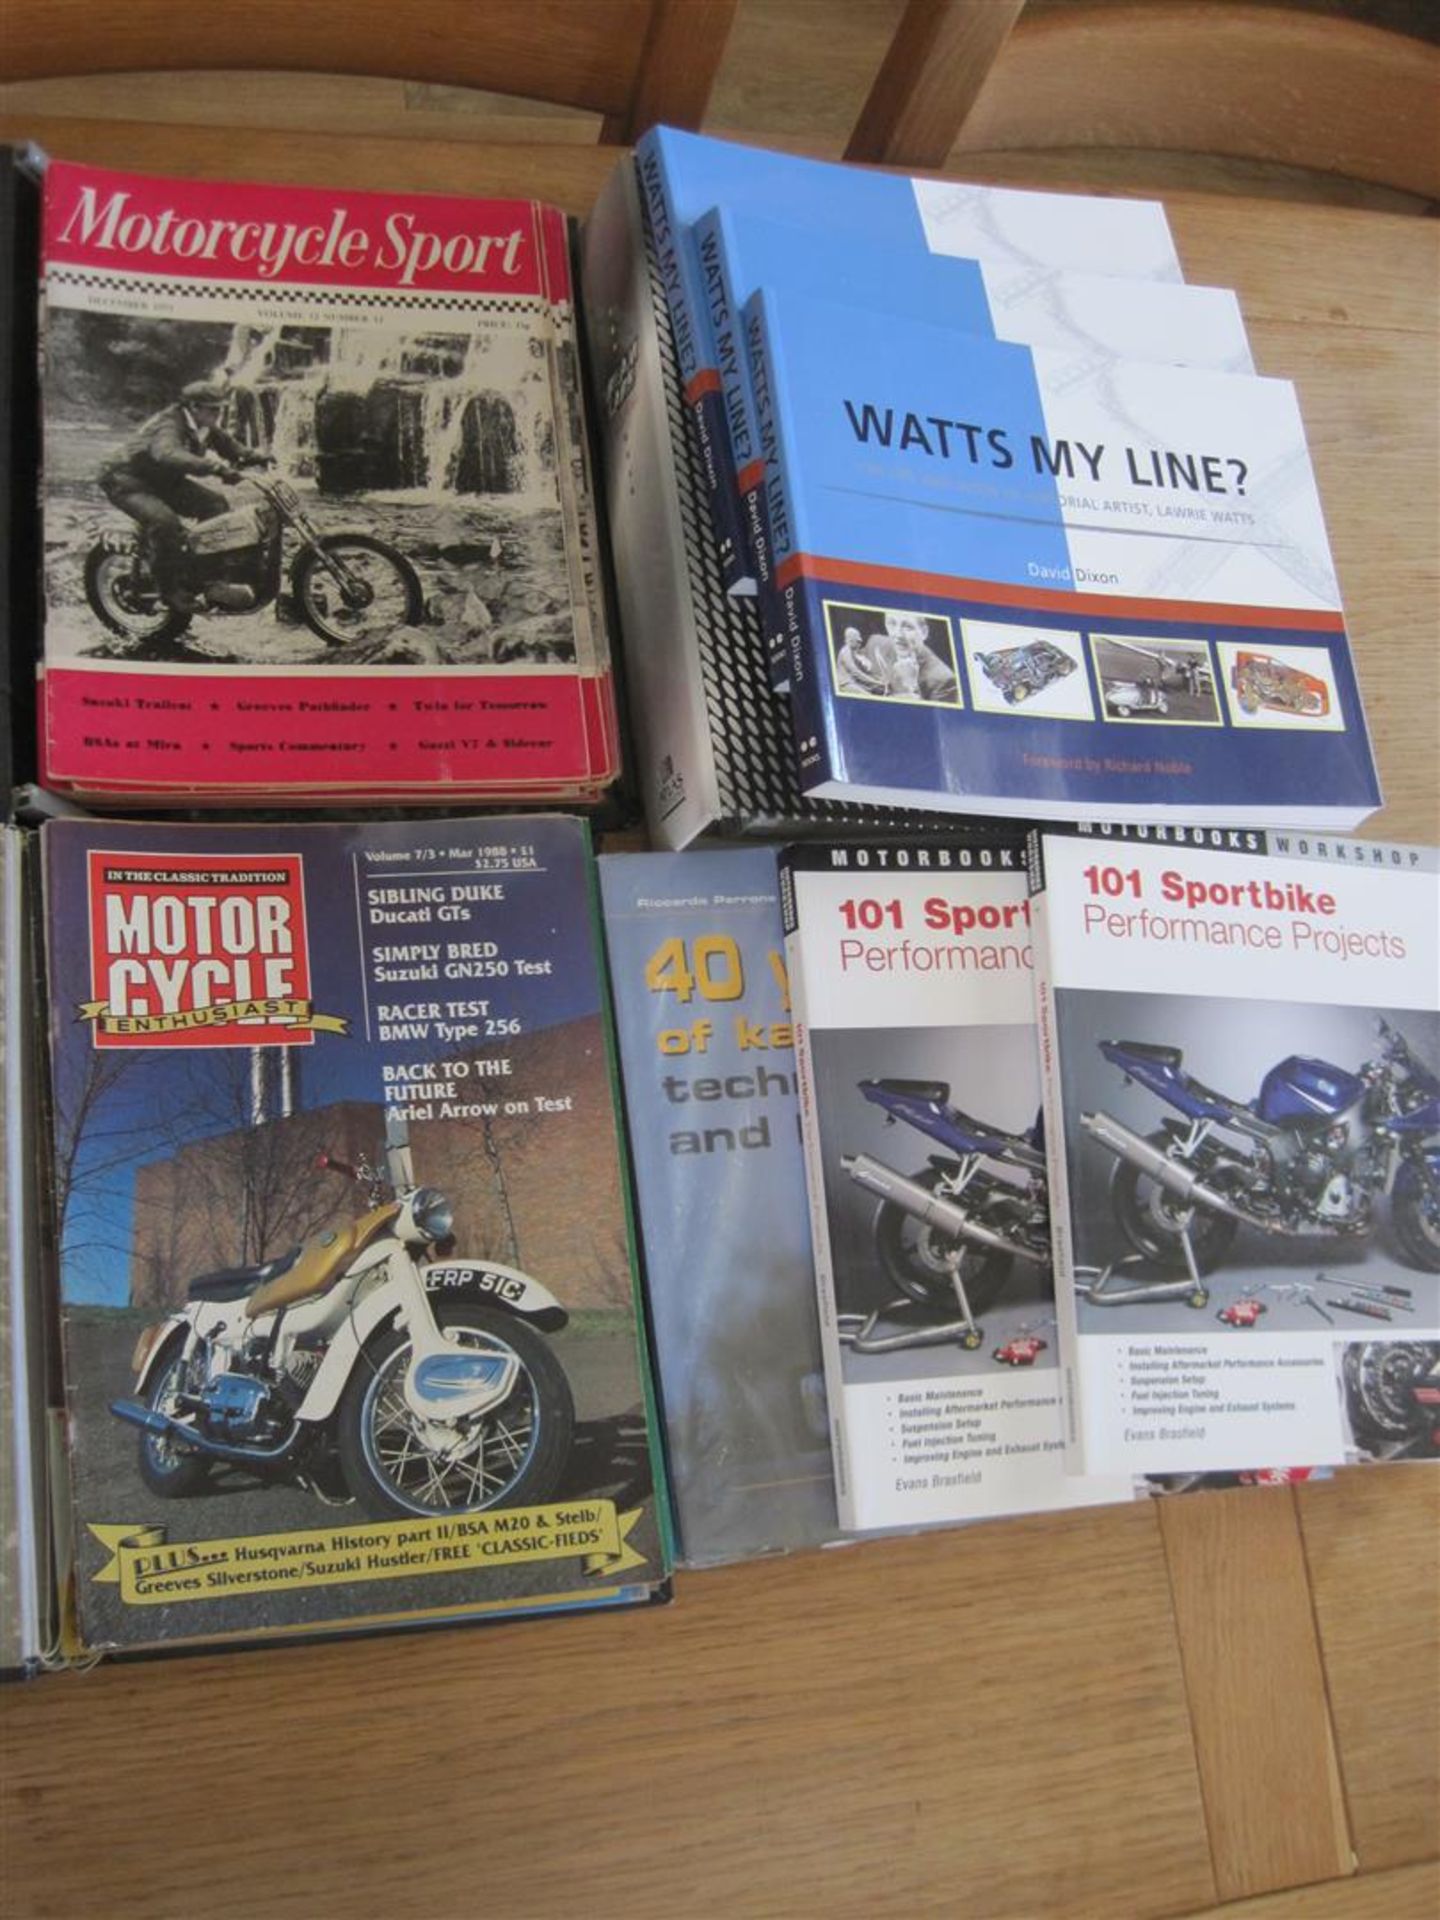 Motorcycle Sport/Enthusiast t/w various other volumes from Mick Walkers library